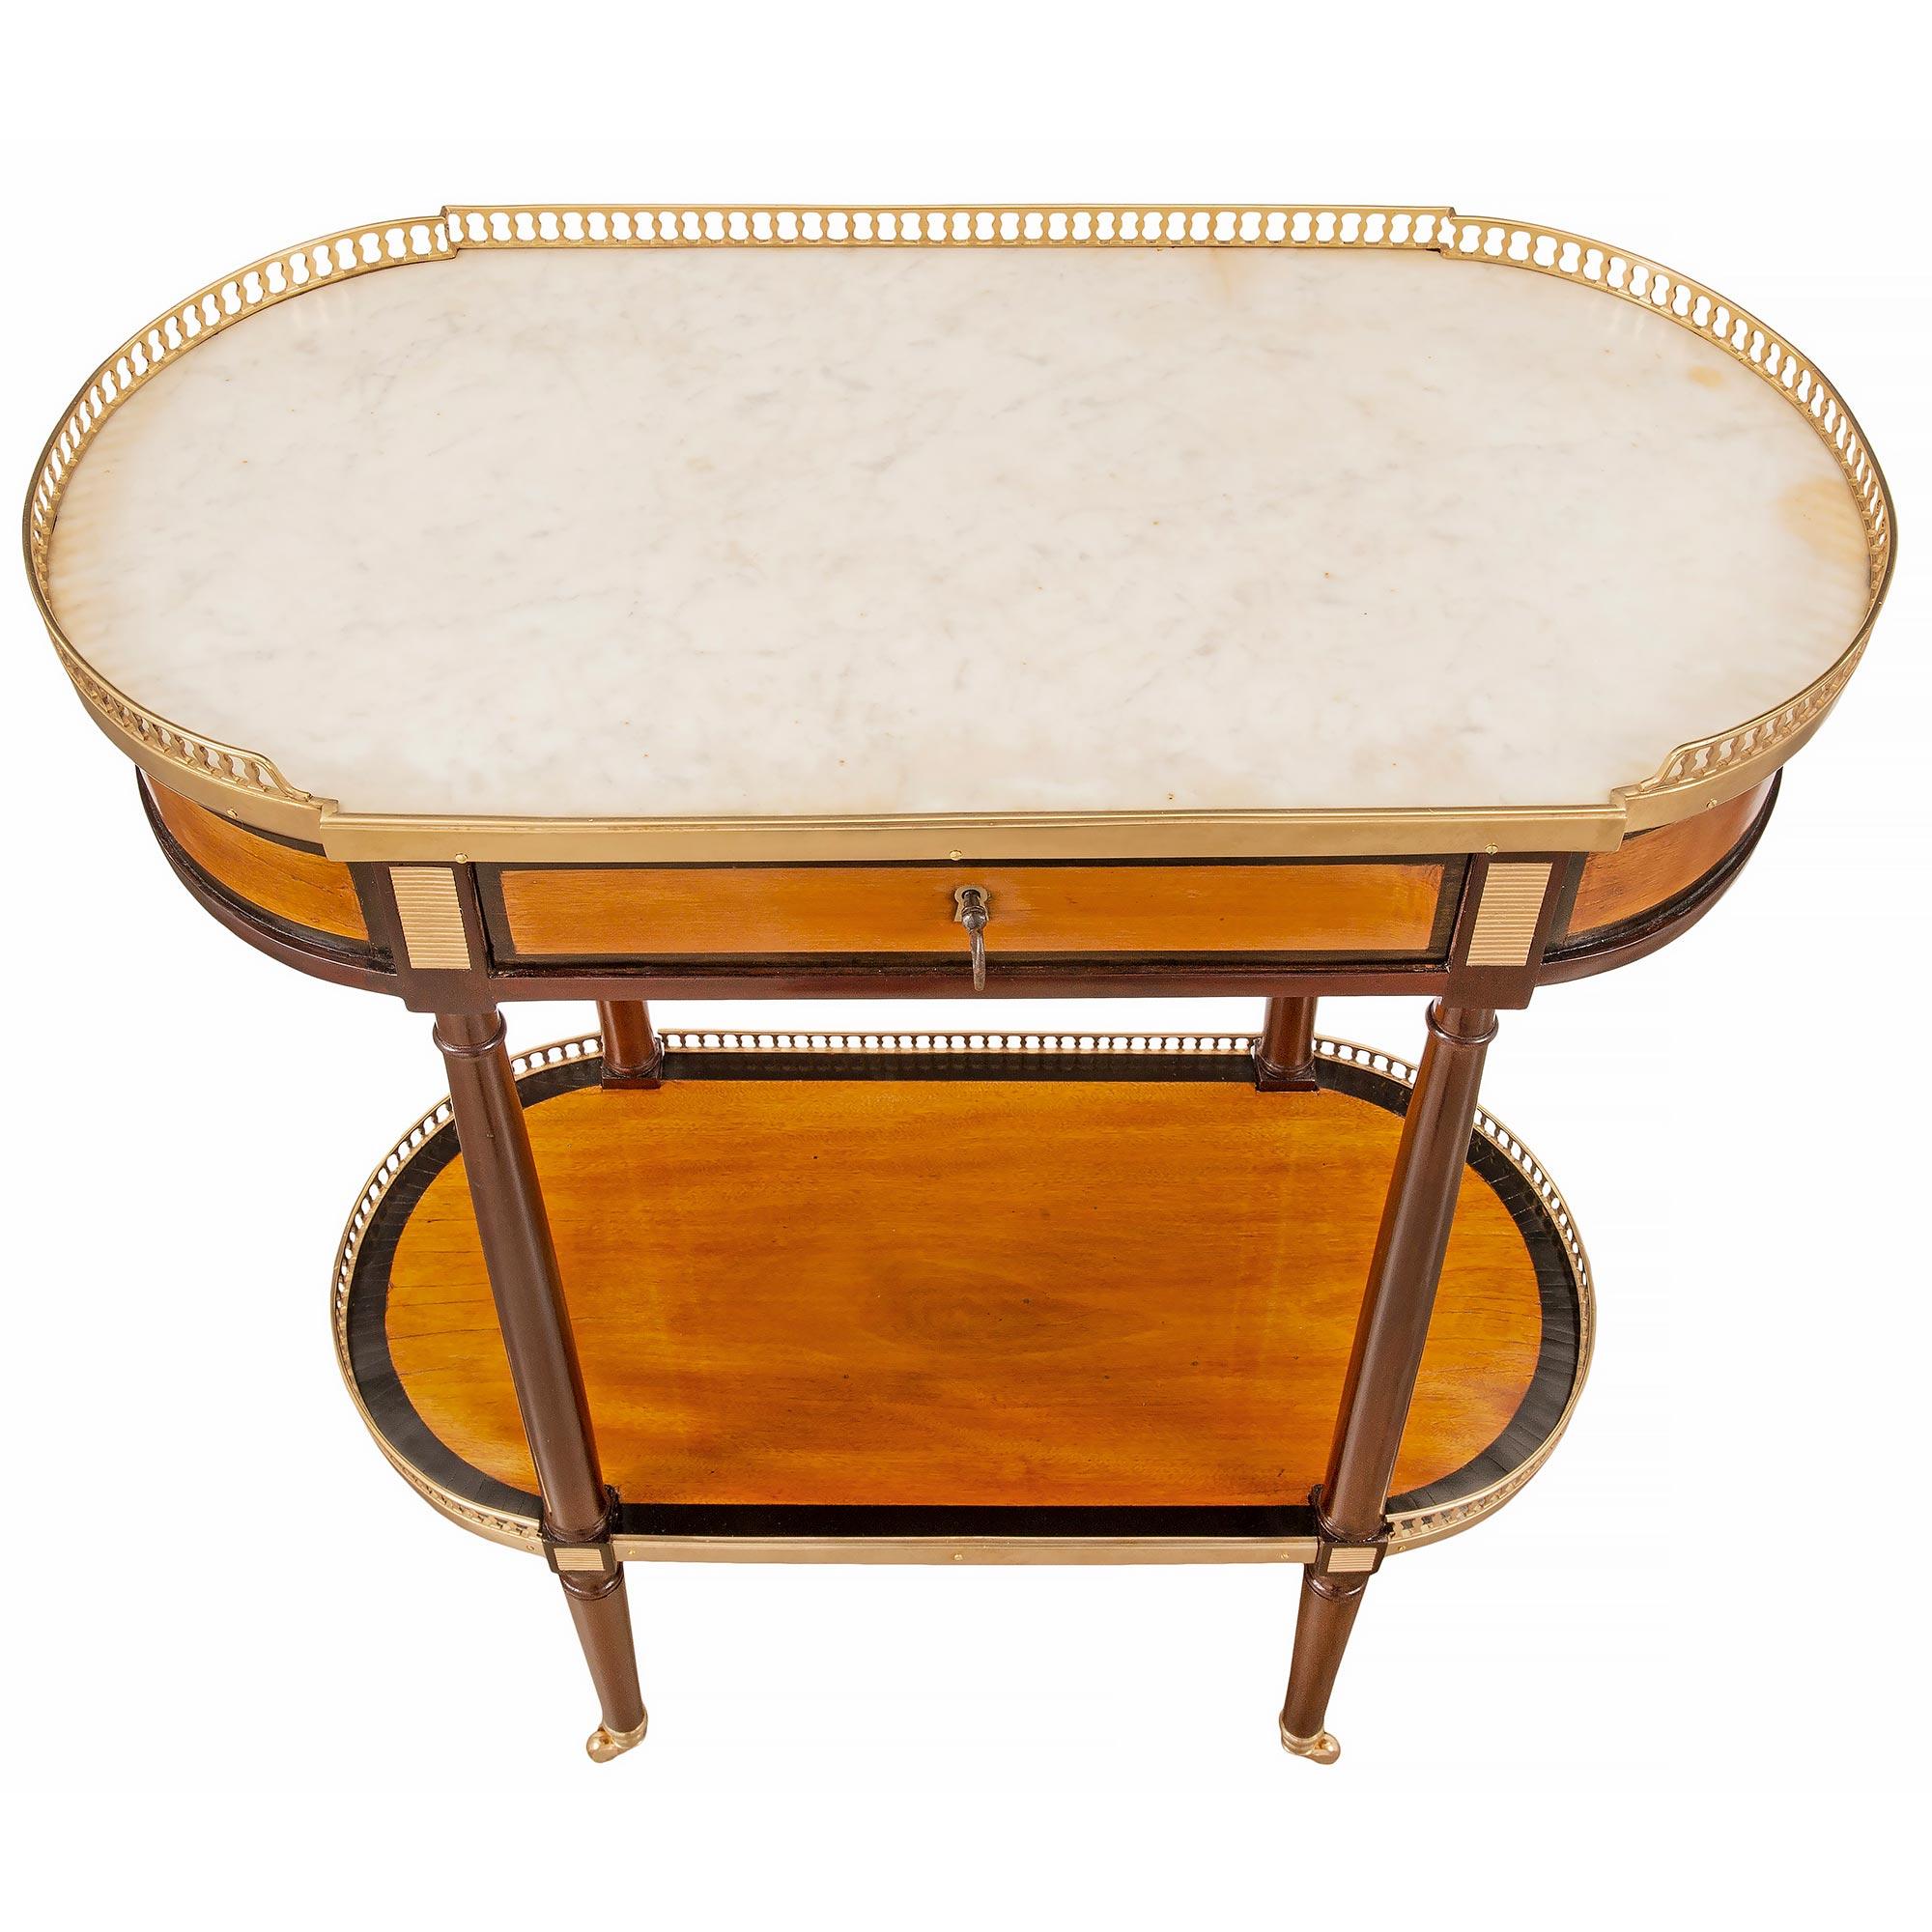 A most elegant French 19th century Louis XVI st. mahogany, satinwood and ormolu oval side table. The table is raised by fine circular tapered legs with their original ormolu casters. The legs are joined by a display tier, inlaid with satinwood